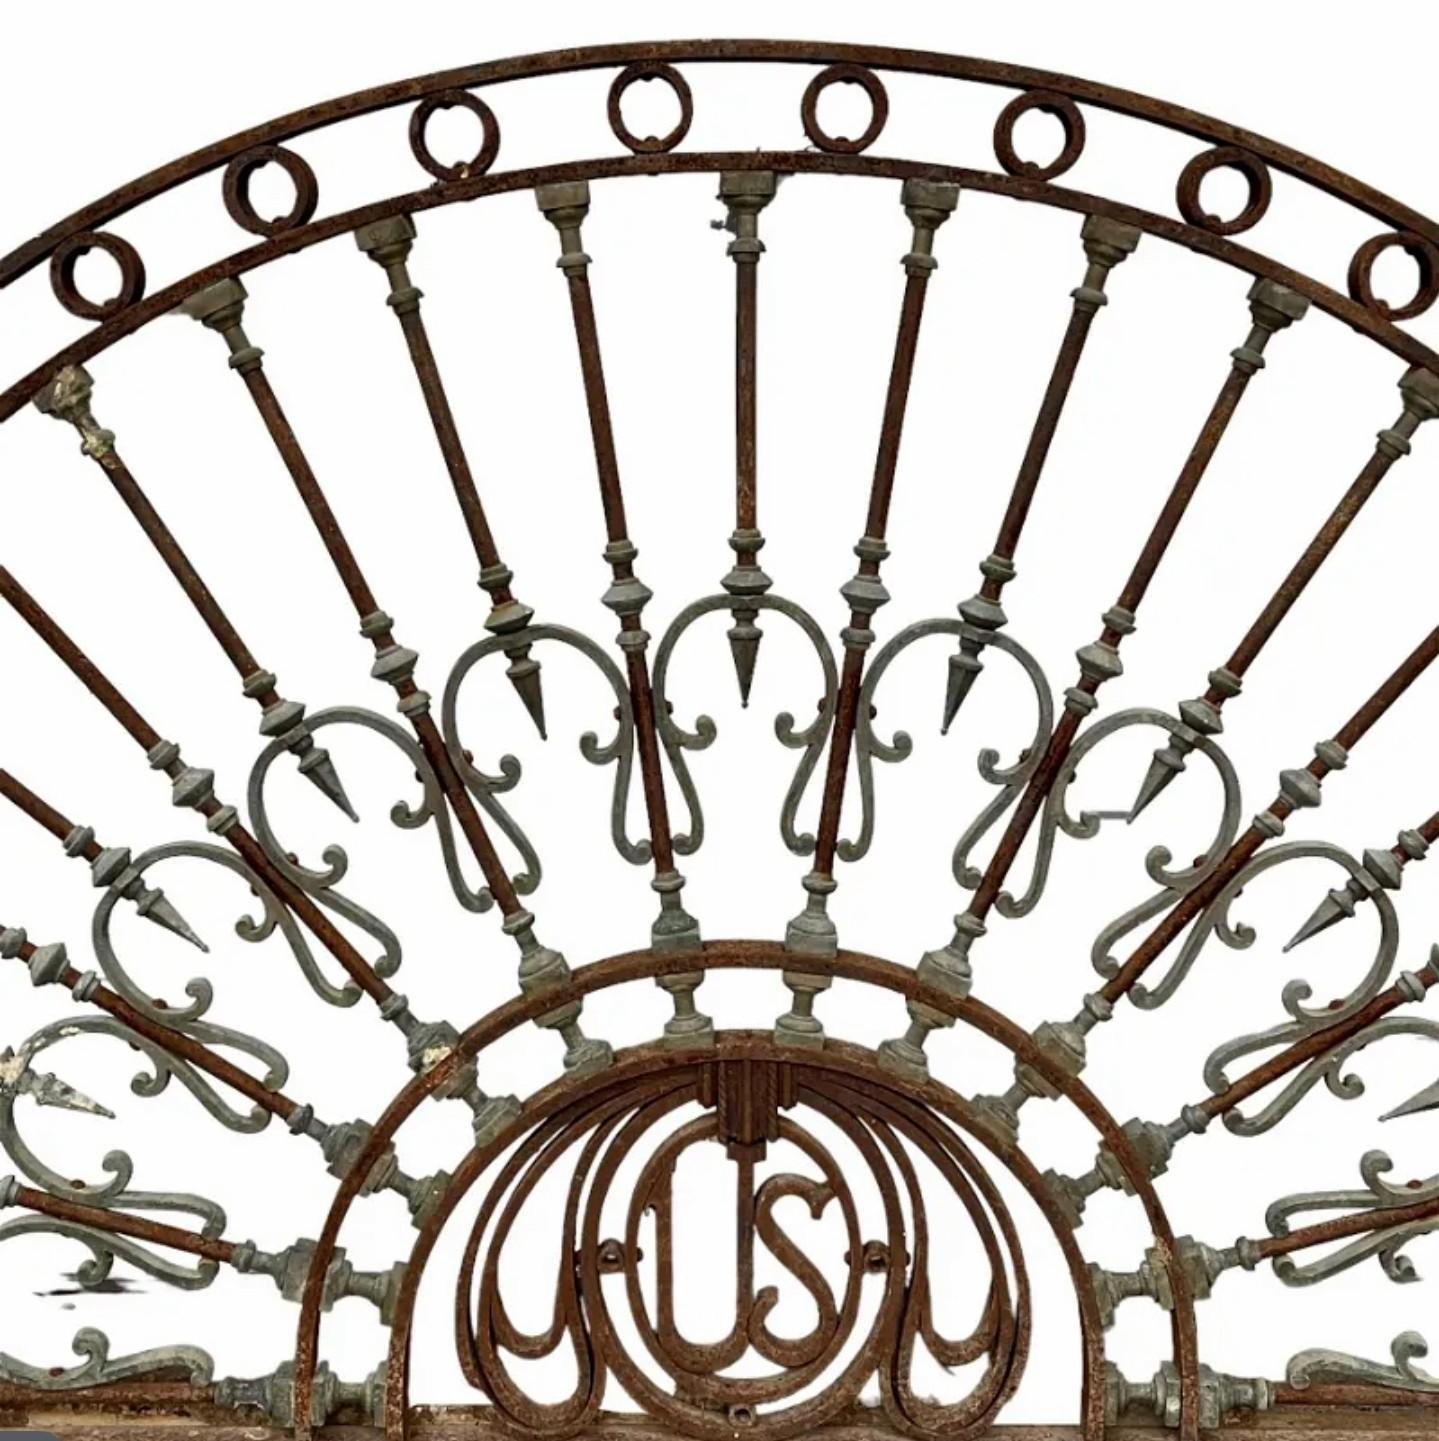 A rare and important late 19th / early 20th century American classical arched iron architectural fanlight header salvaged from a United States Embassy. 

Monumental size, lunete form, exceptionally executed stylized sunburt-like pediment sculpture